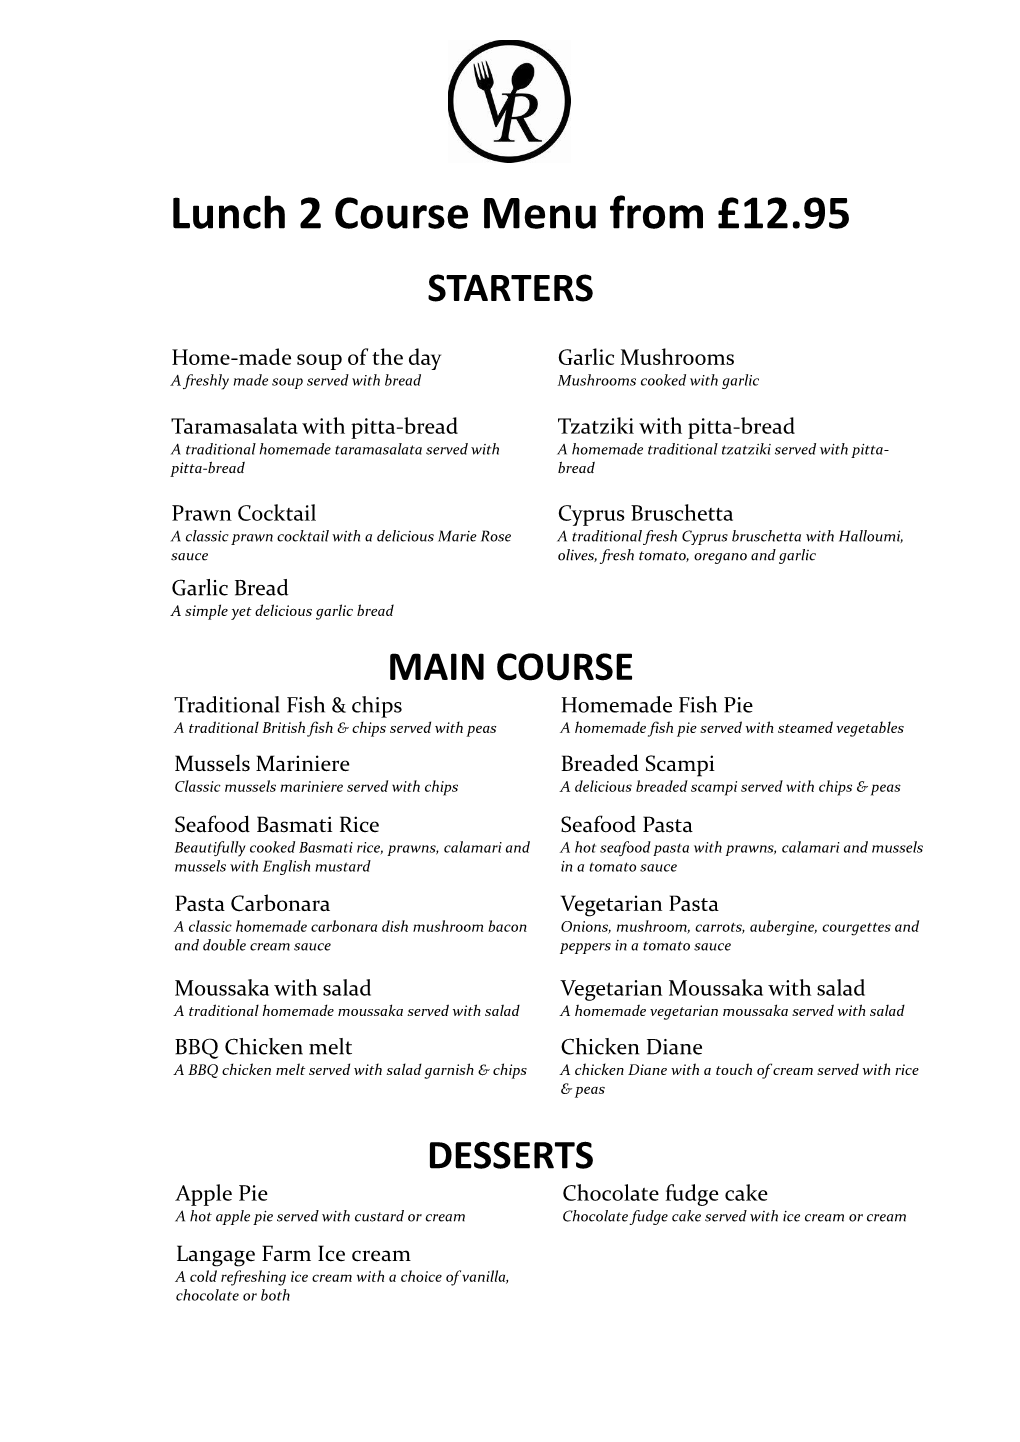 Lunch 2 Course Menu from £12.95